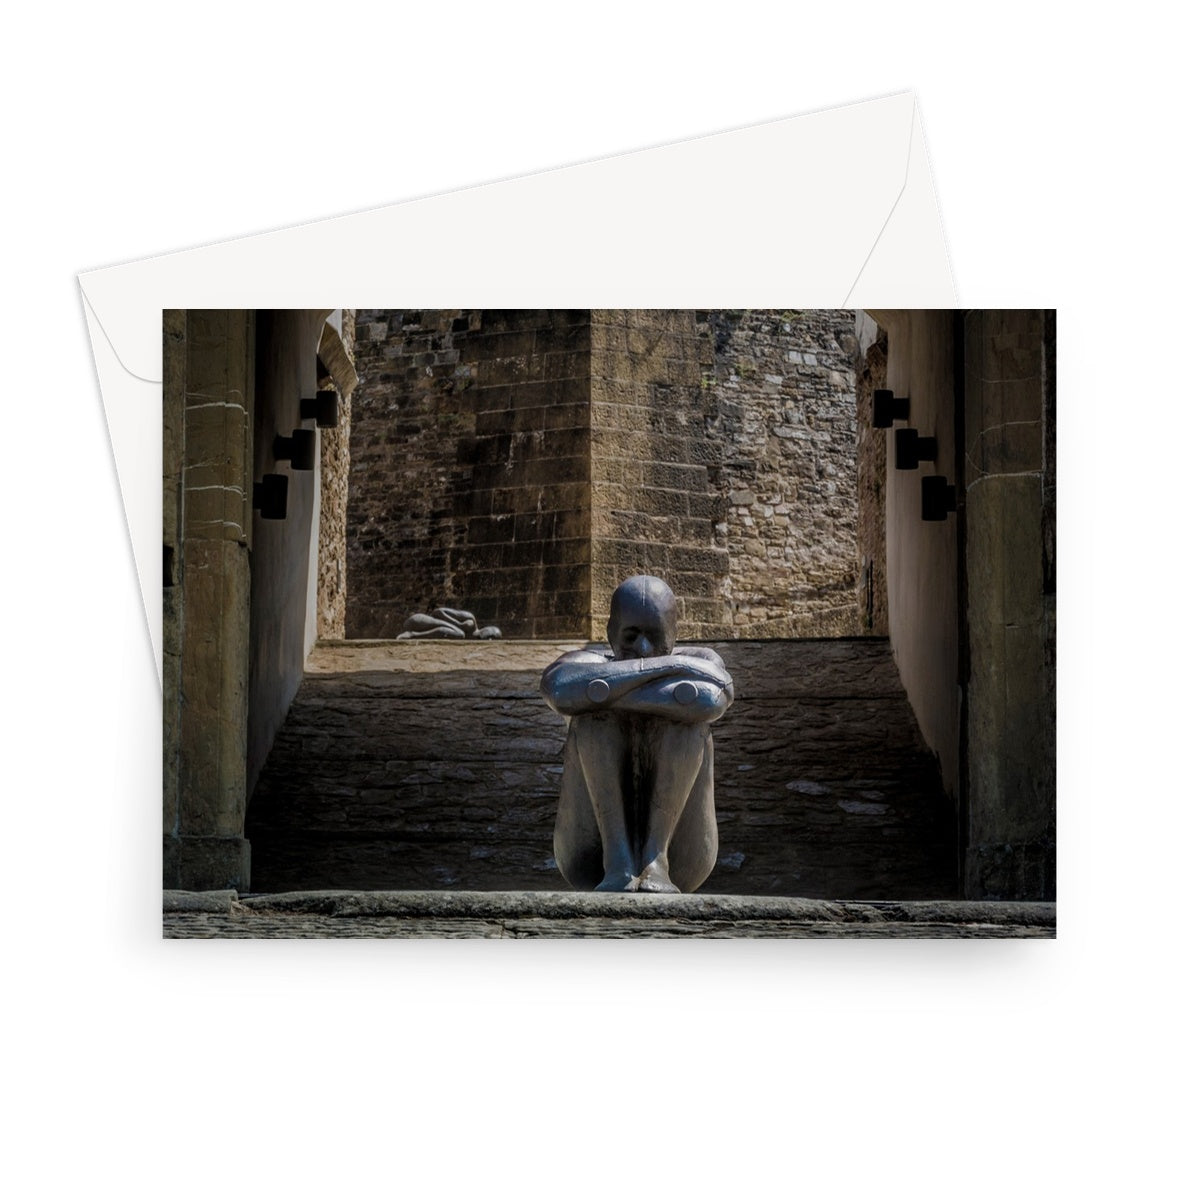 Antony Gormley HUMAN sculpture exhibition at  Forte di Belvedere, Florence, Italy Greeting Card